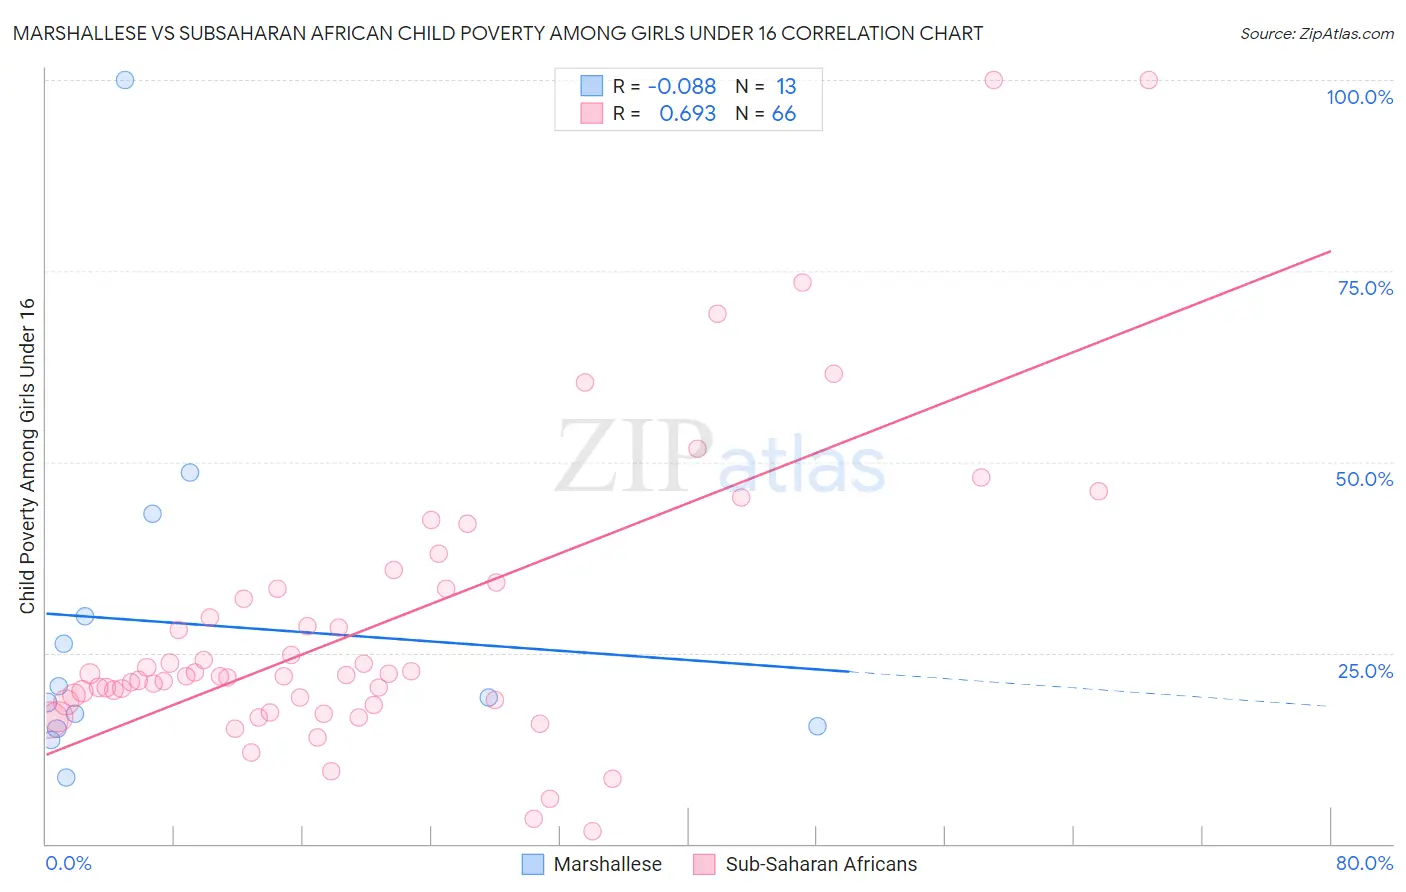 Marshallese vs Subsaharan African Child Poverty Among Girls Under 16